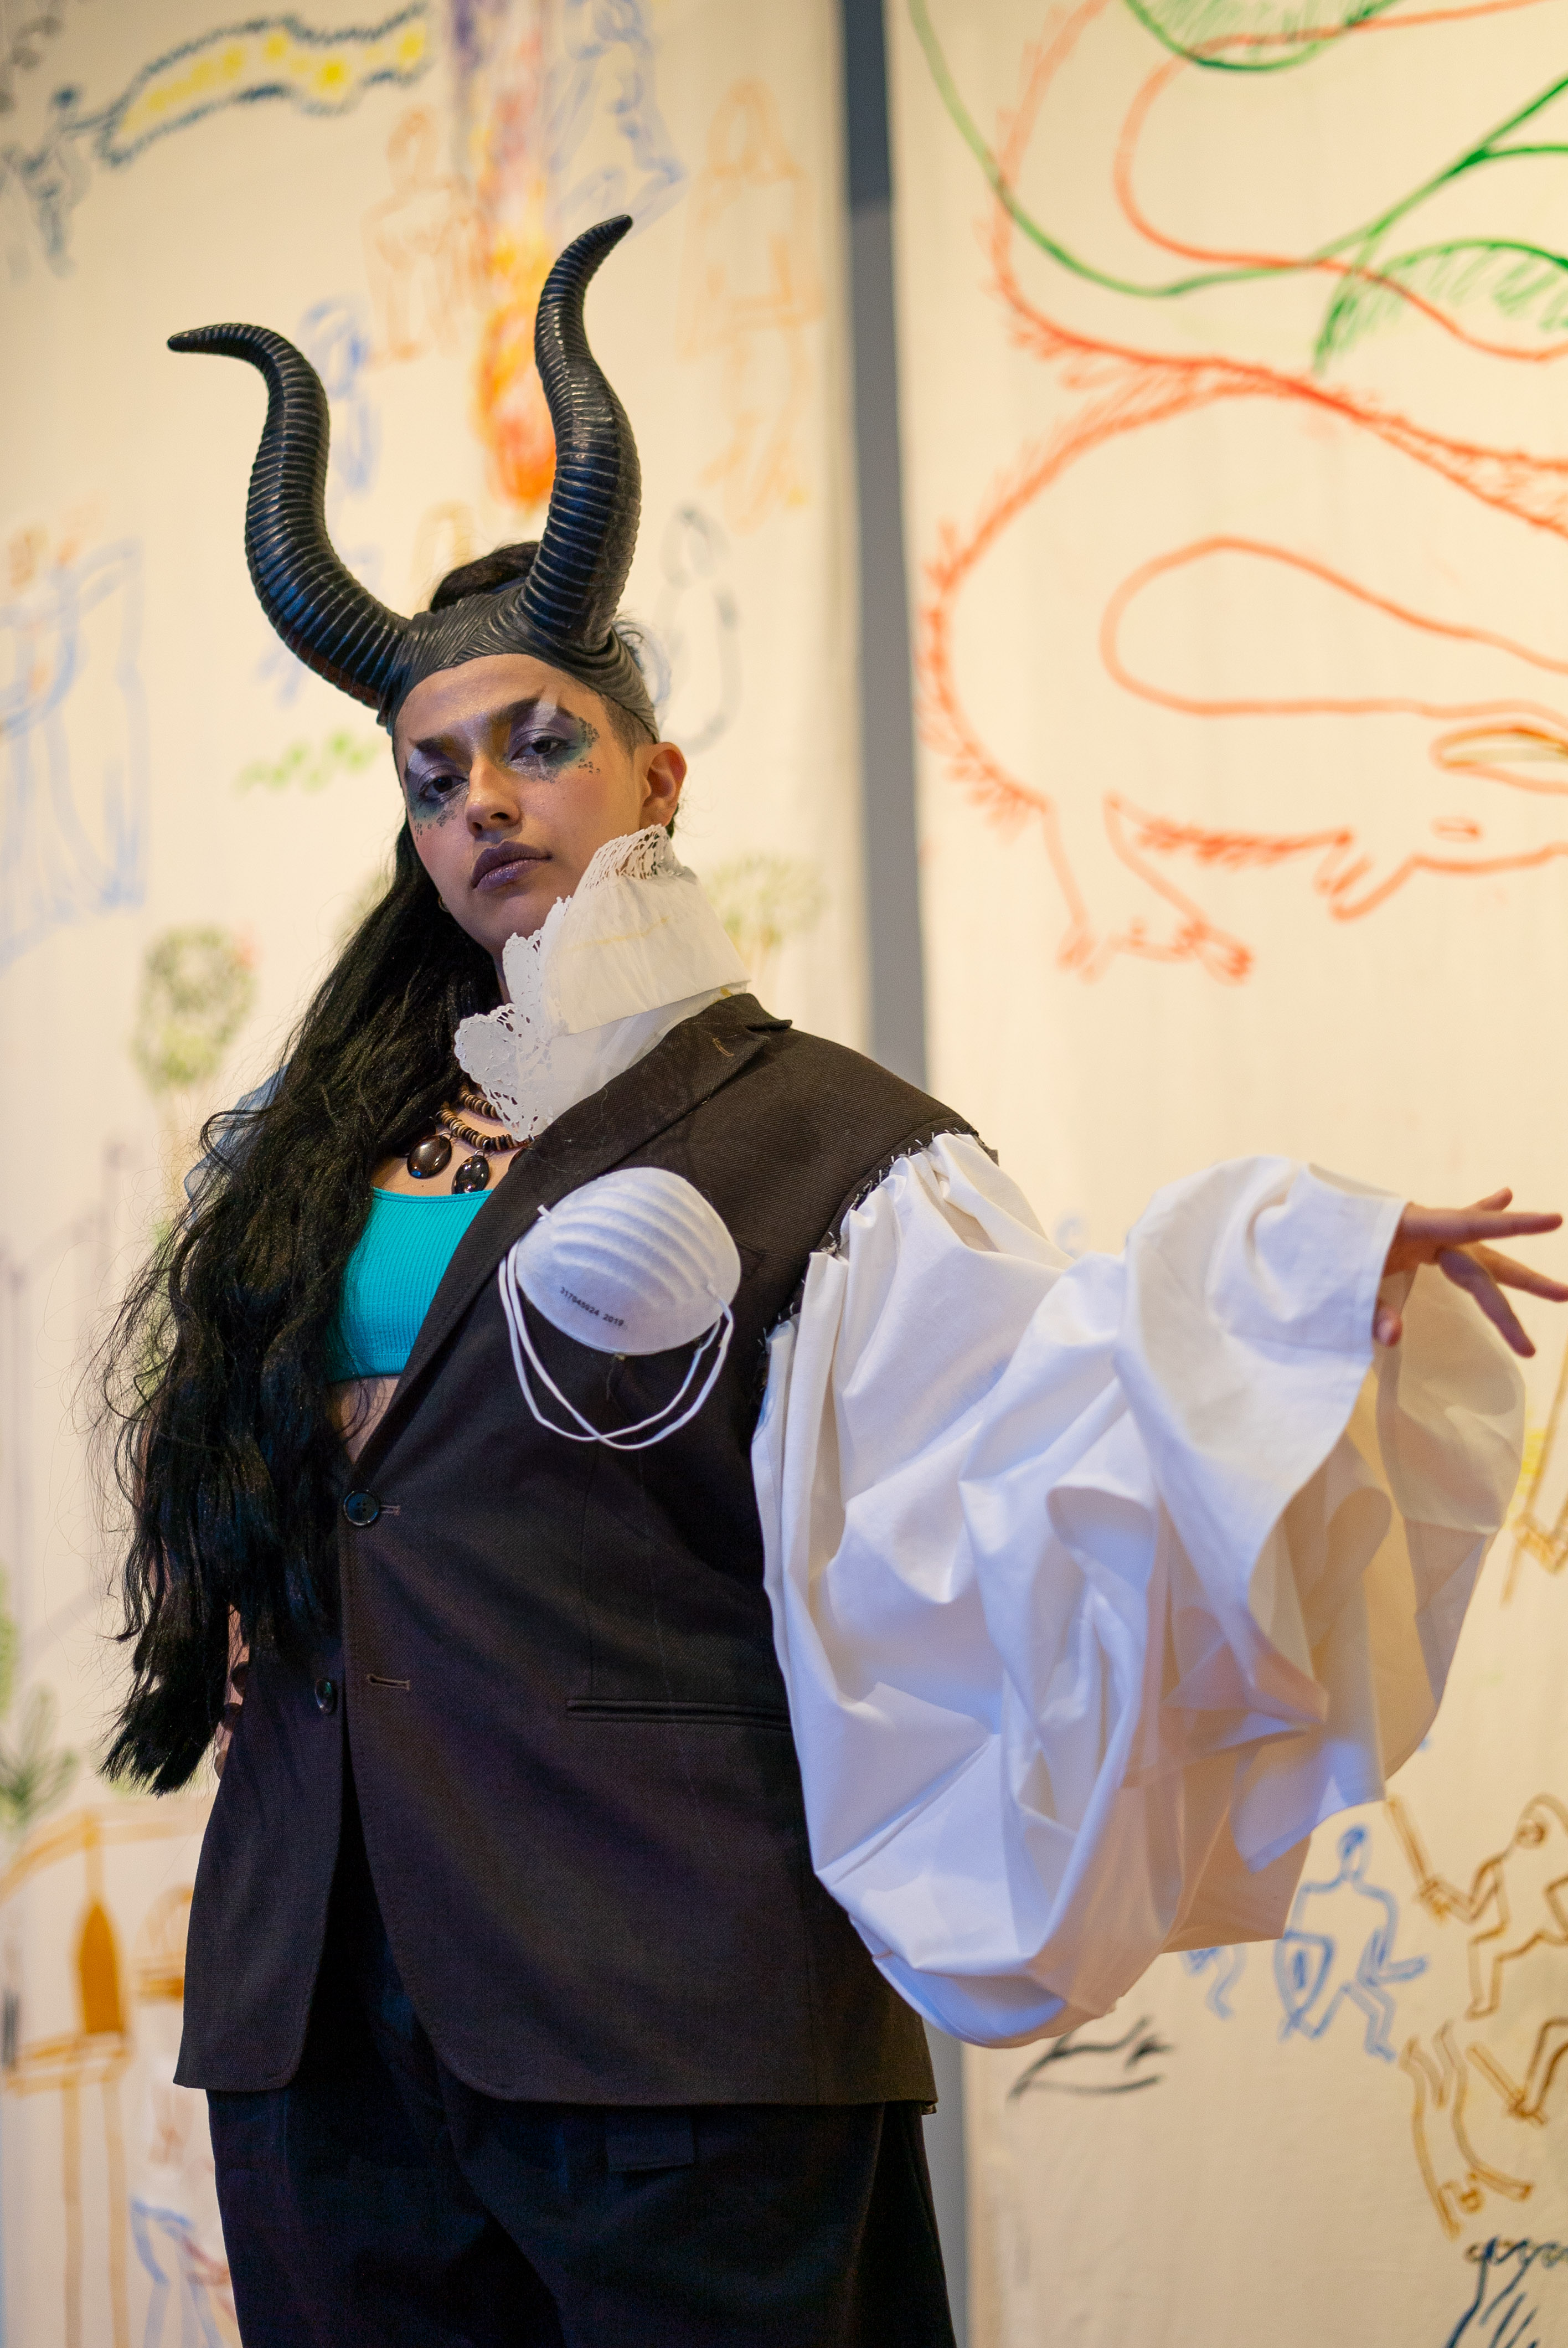 The photo shows a person posing in an imaginative costume. They wear two plastic horns on her head and a long black plait of hair down to her hips. Their left hand is outstretched to the side and shows a voluminous white sleeve. In the background we see antique looking white banners painted with colored figures by the artist Irene Fernandez Arcas.